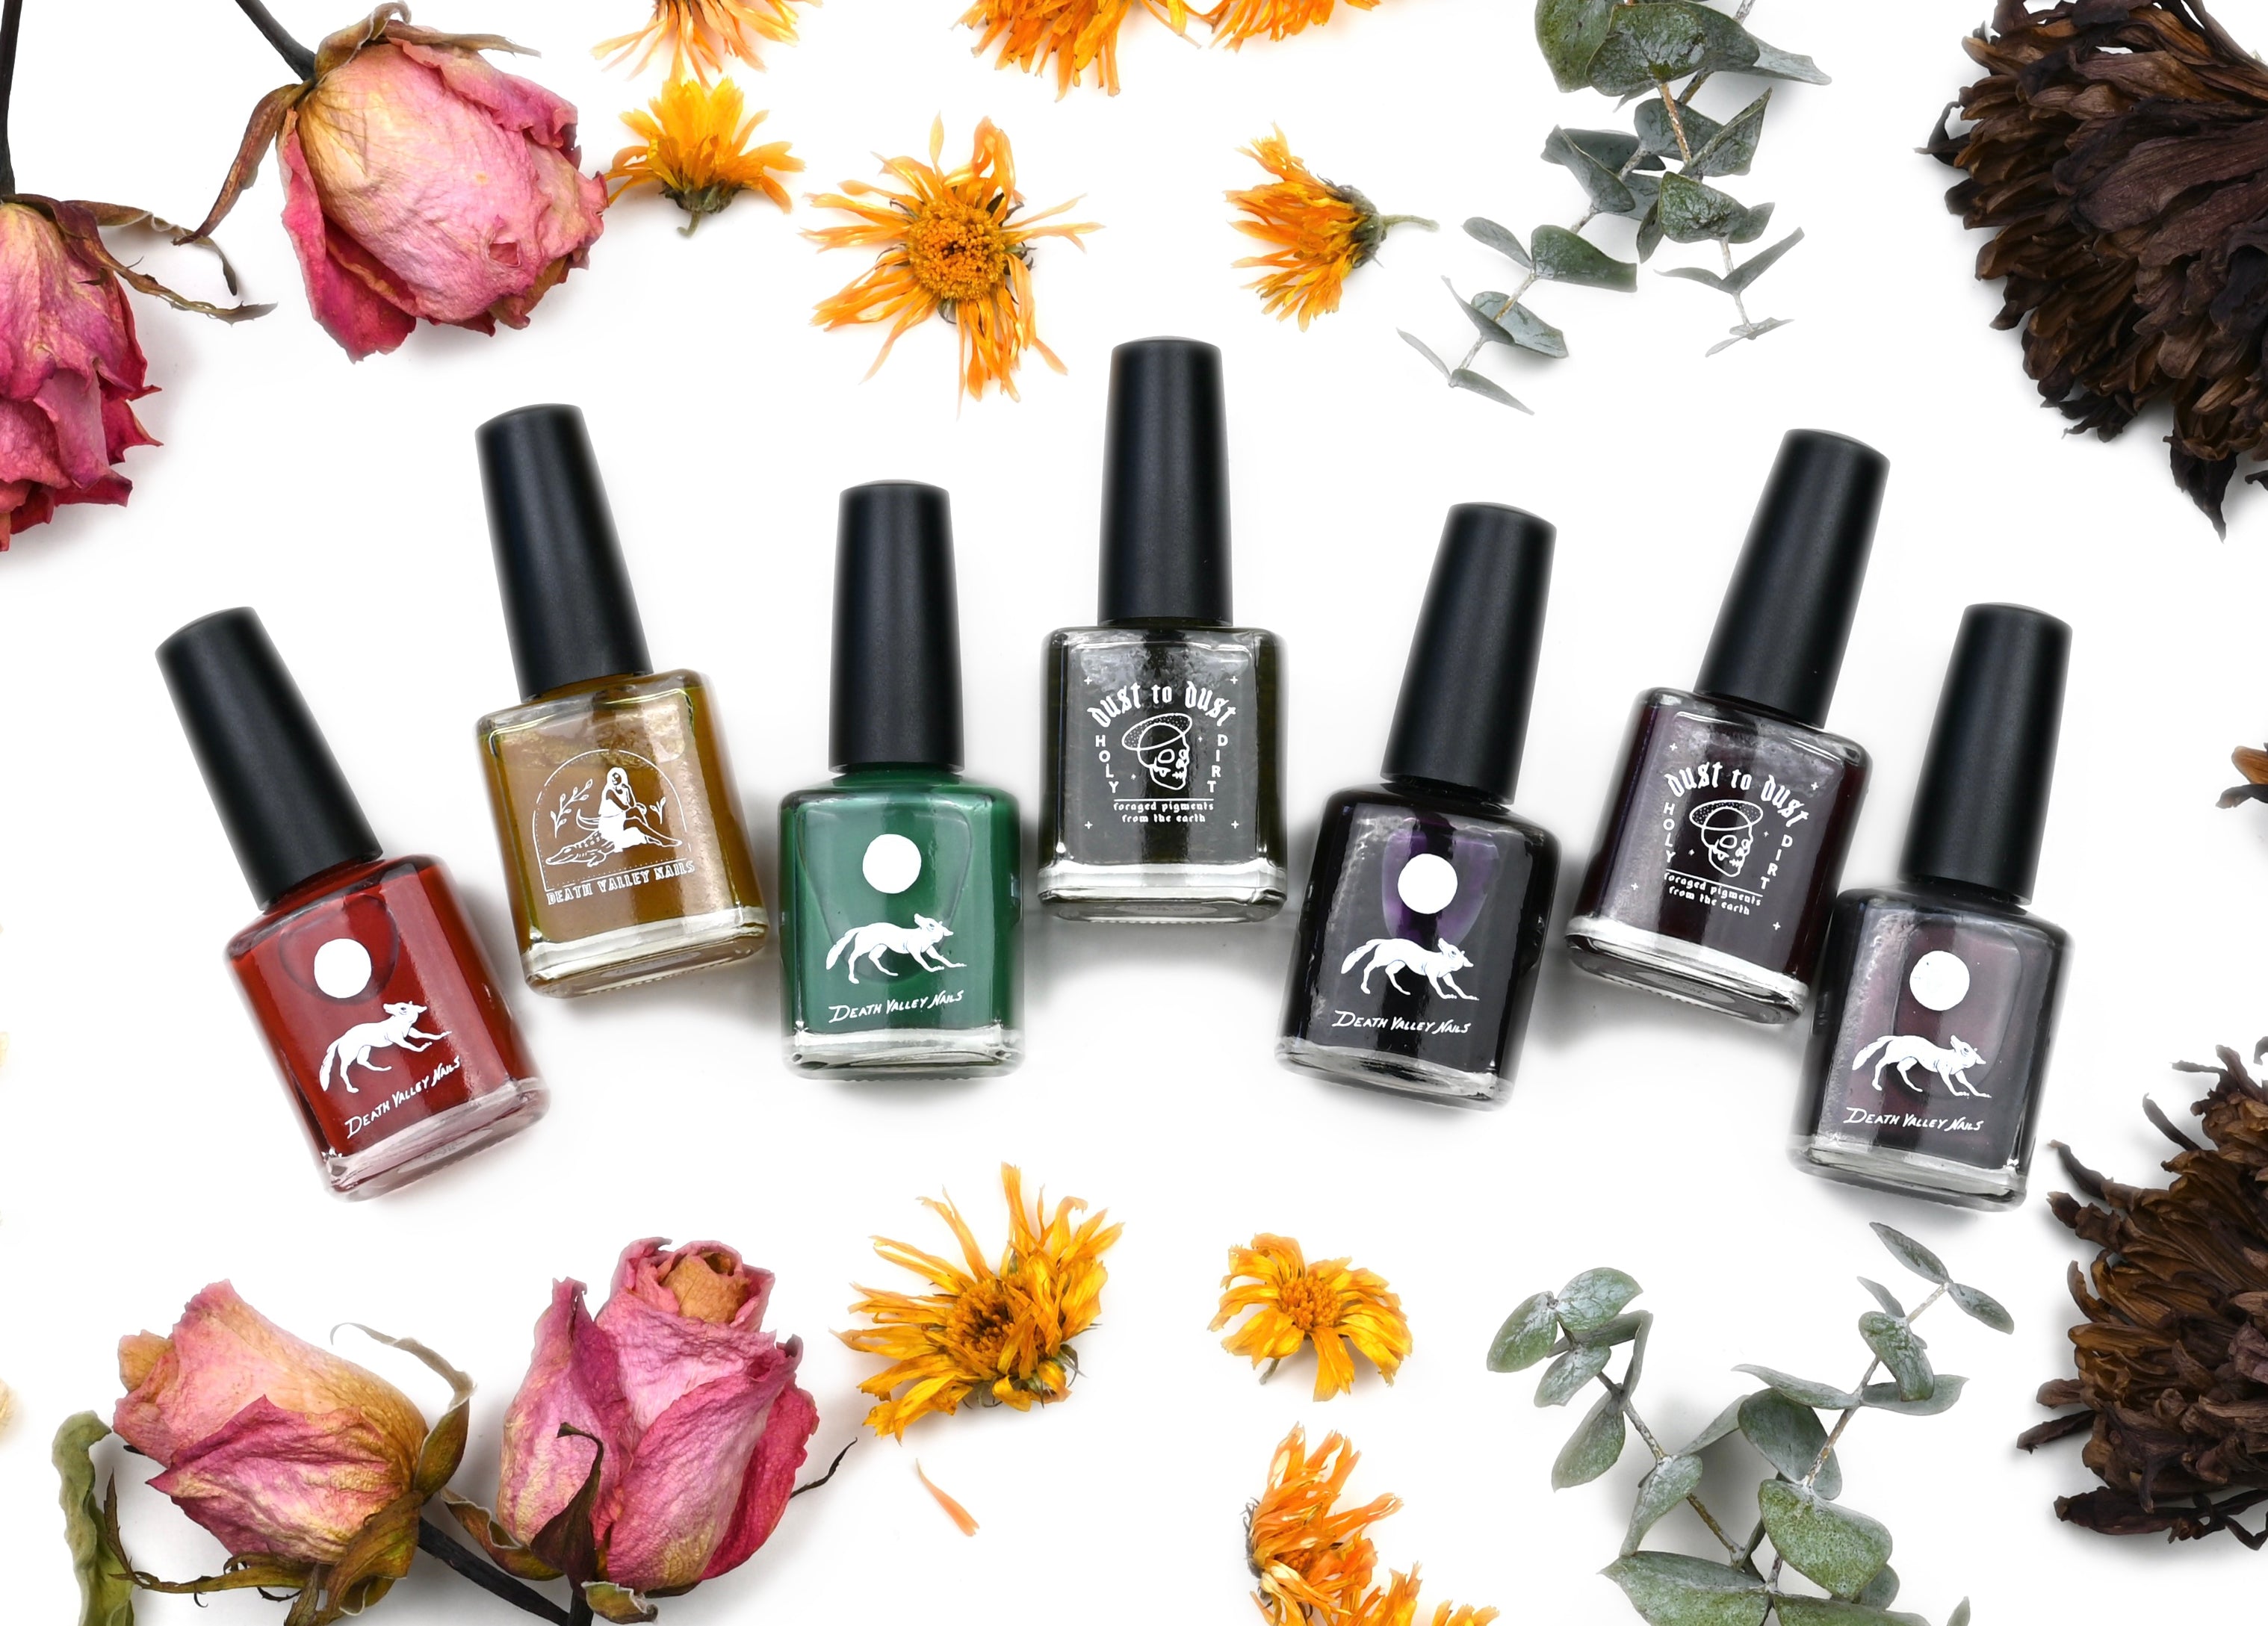 A variety of non-toxic nail polishes from Death Valley Nails